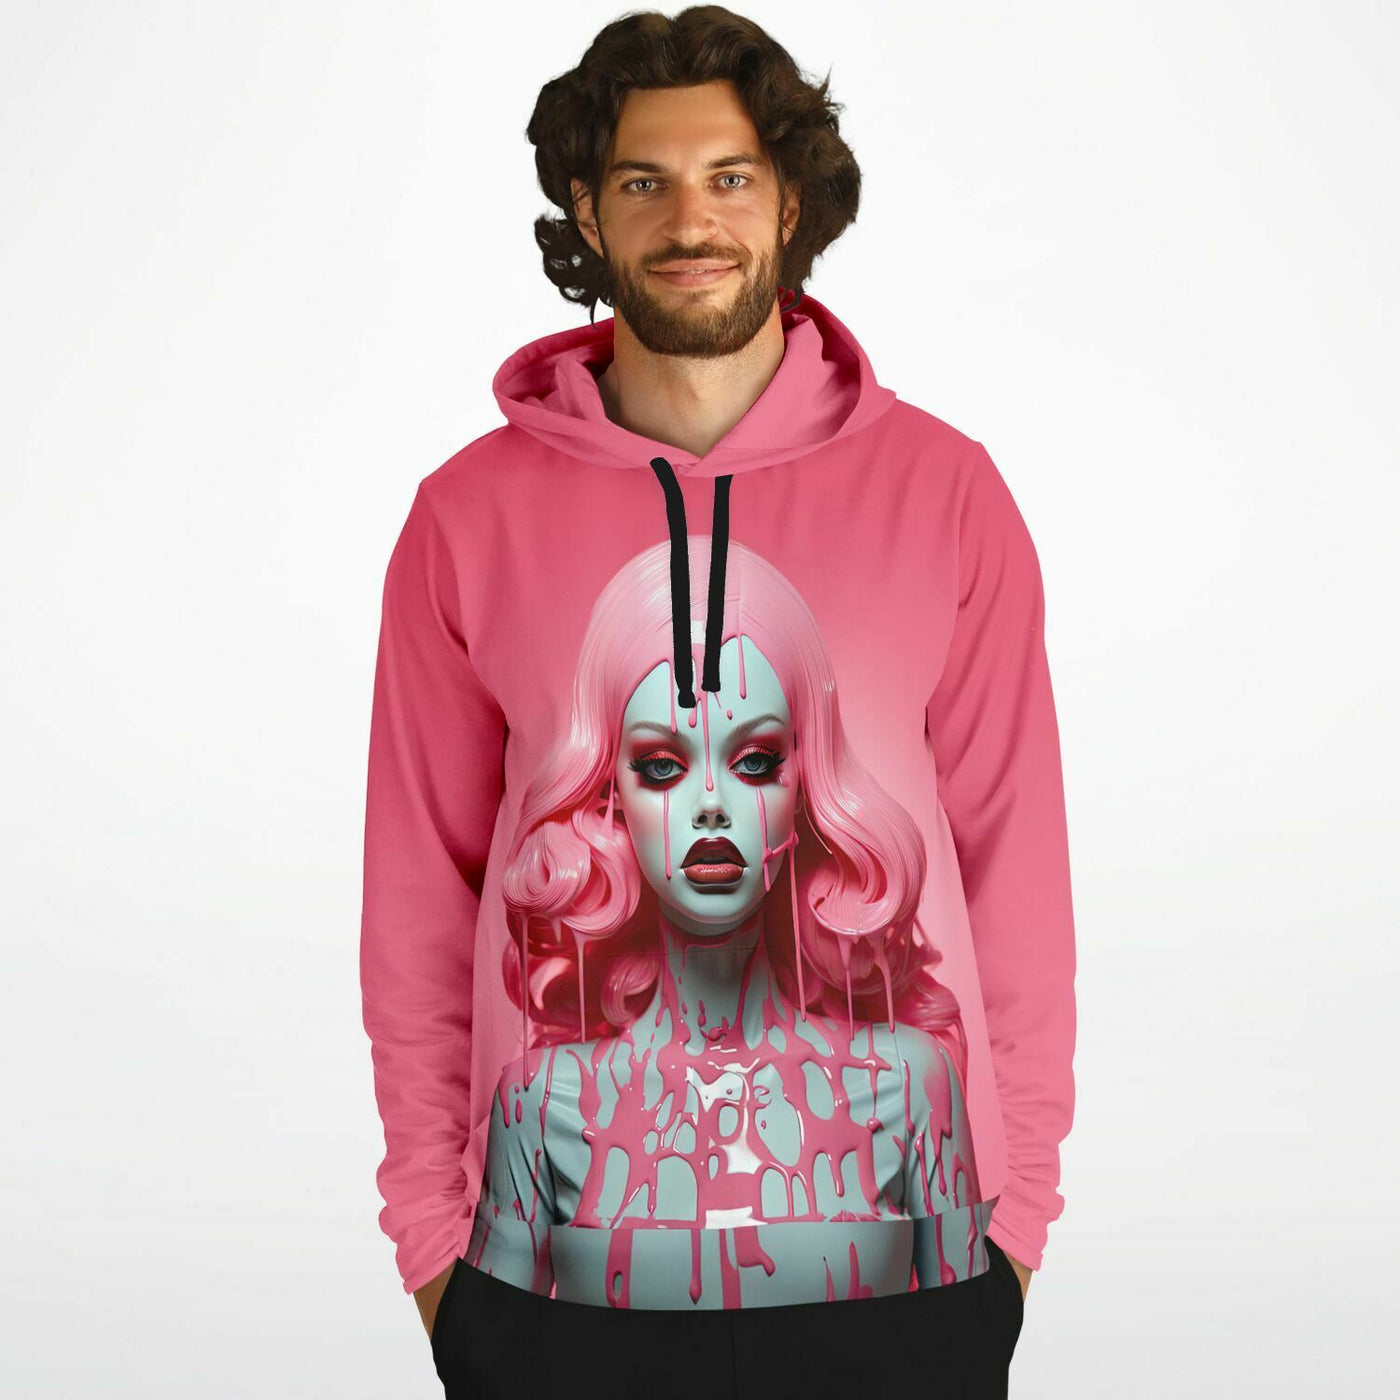 Scary Melting Doll Pop Surreal Fashion Hoodie